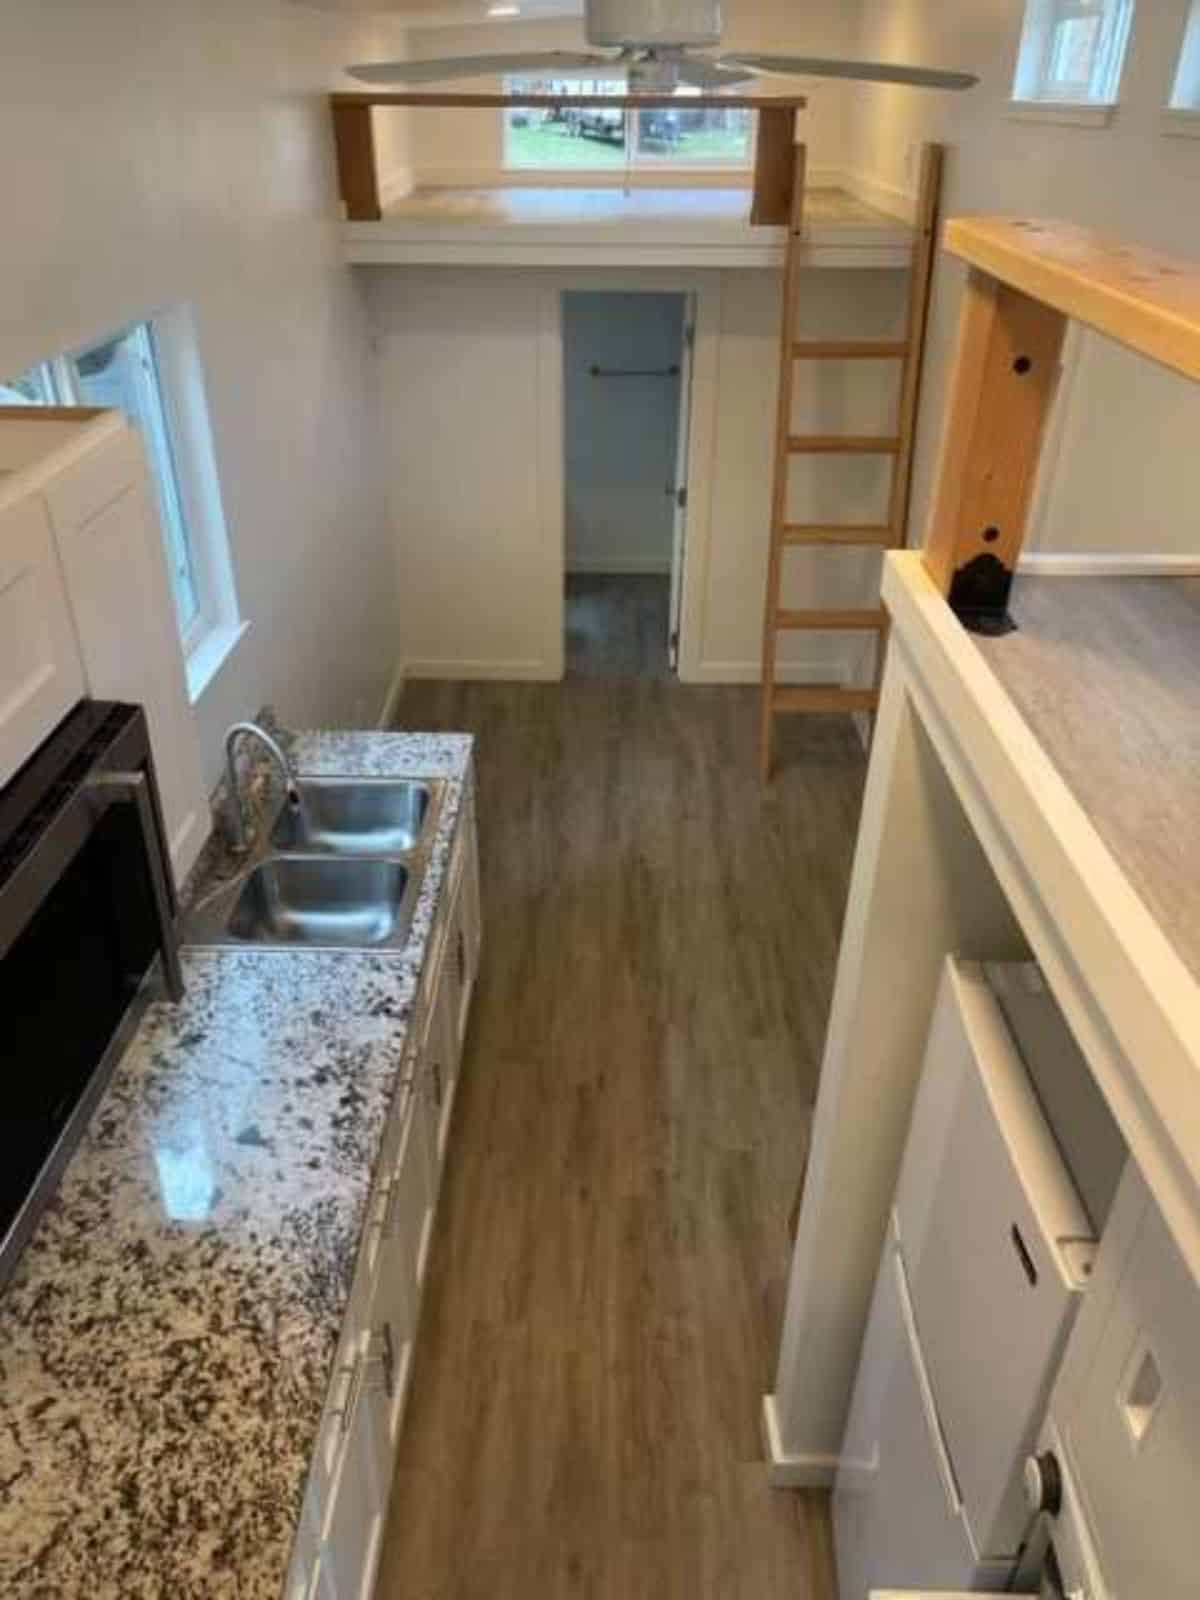 huge countertop in kitchen area of tiny home with a loft